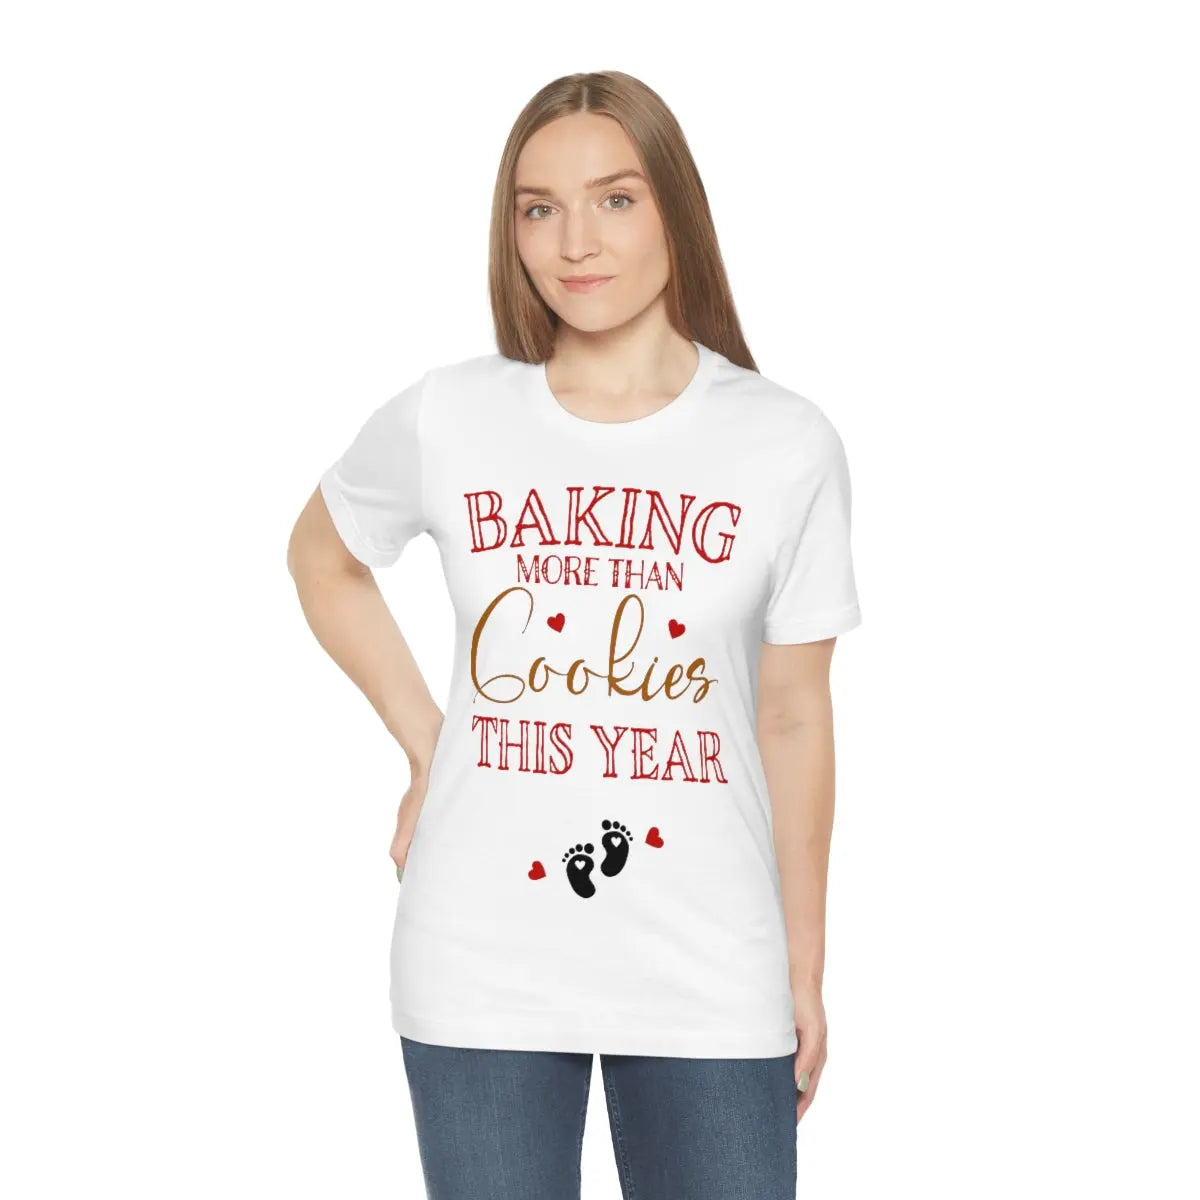 Baking More than Cookies Tee, Christmas Pregnancy Shirt, Pregnancy  Announcement Tee, Holiday Maternity Shirt